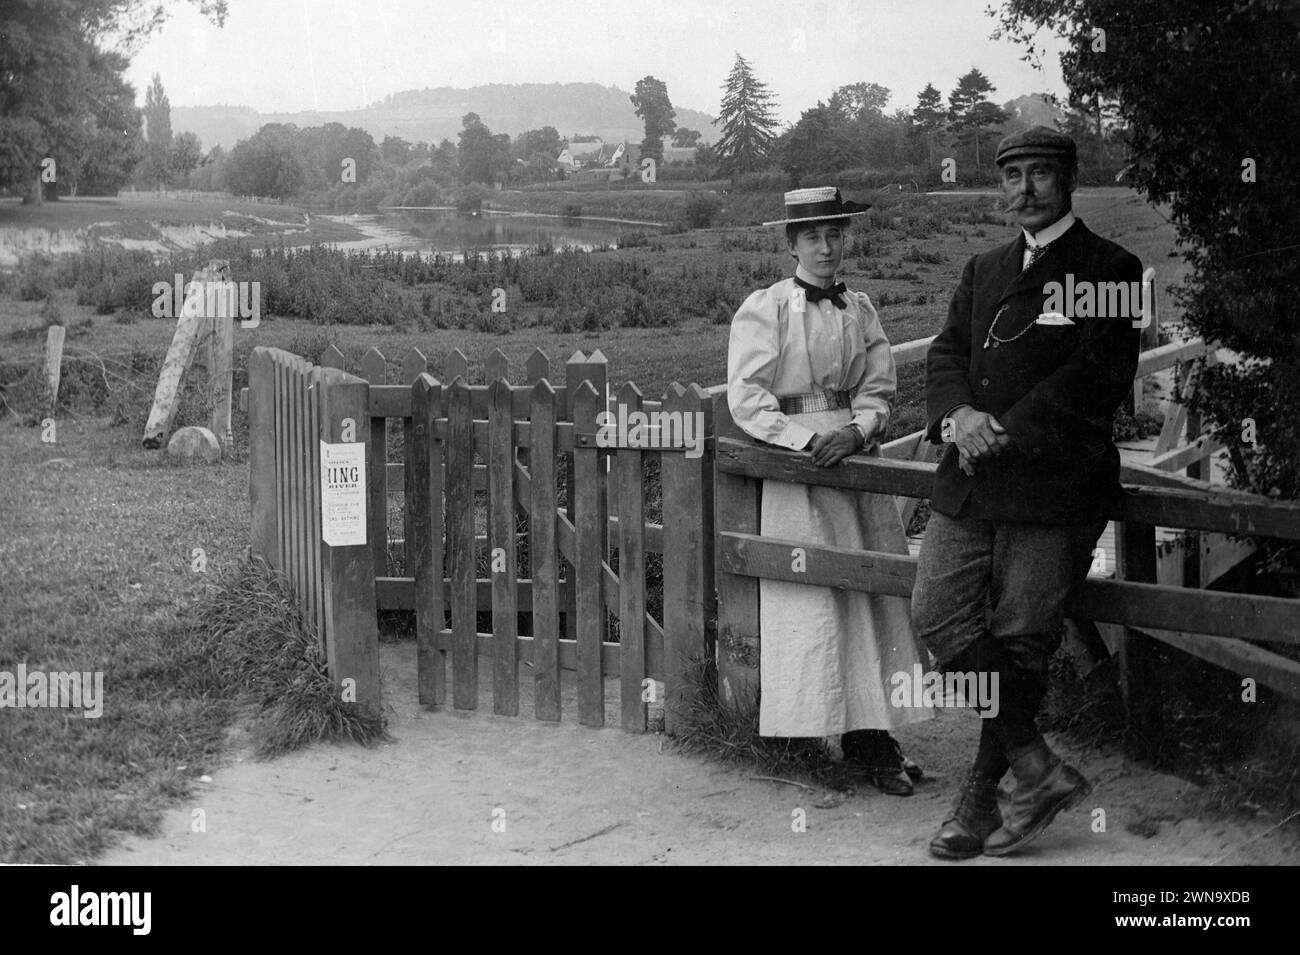 1897 Historic Black and White Photograph of Mr & Miss Richards Standing by a Wooden Gate and Fence near the River Wye, Hereford, Herefordshire, England, UK Stock Photo